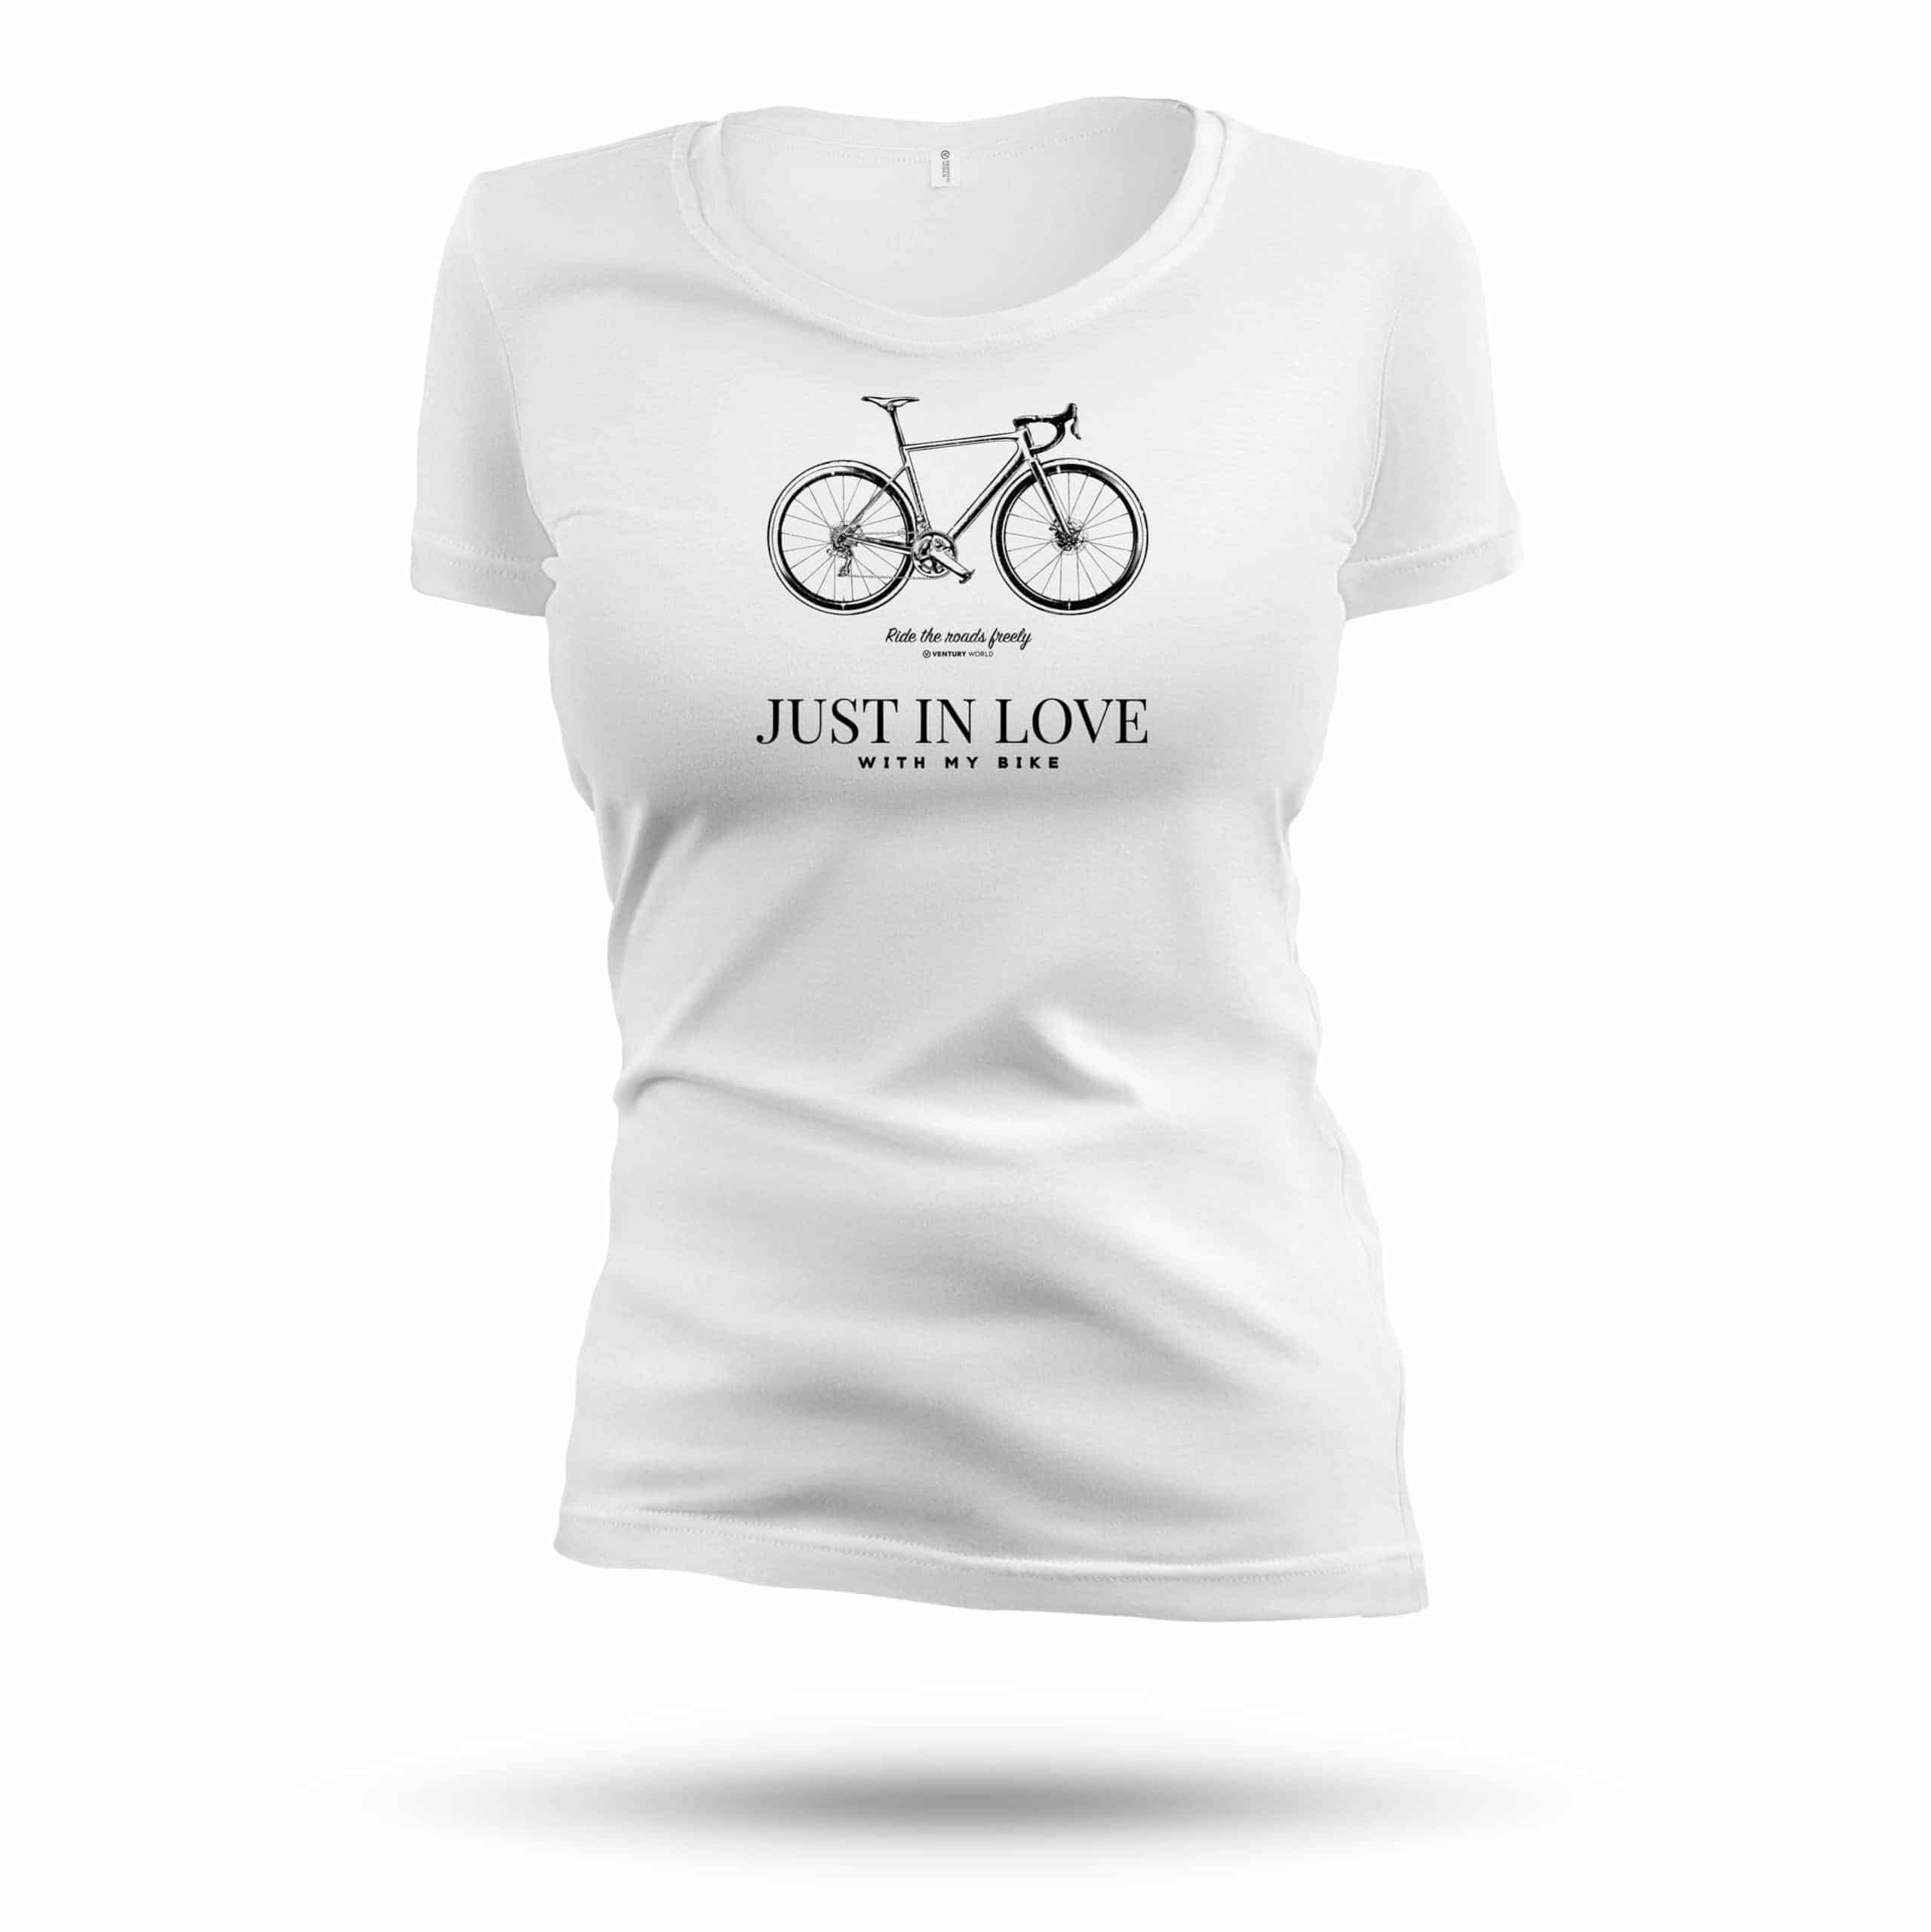 Women's cycling t-shirt - Race Bike - Ride the roads freely - Live Freely women's collection 100% Natural of high quality - fitted size with large round neck.